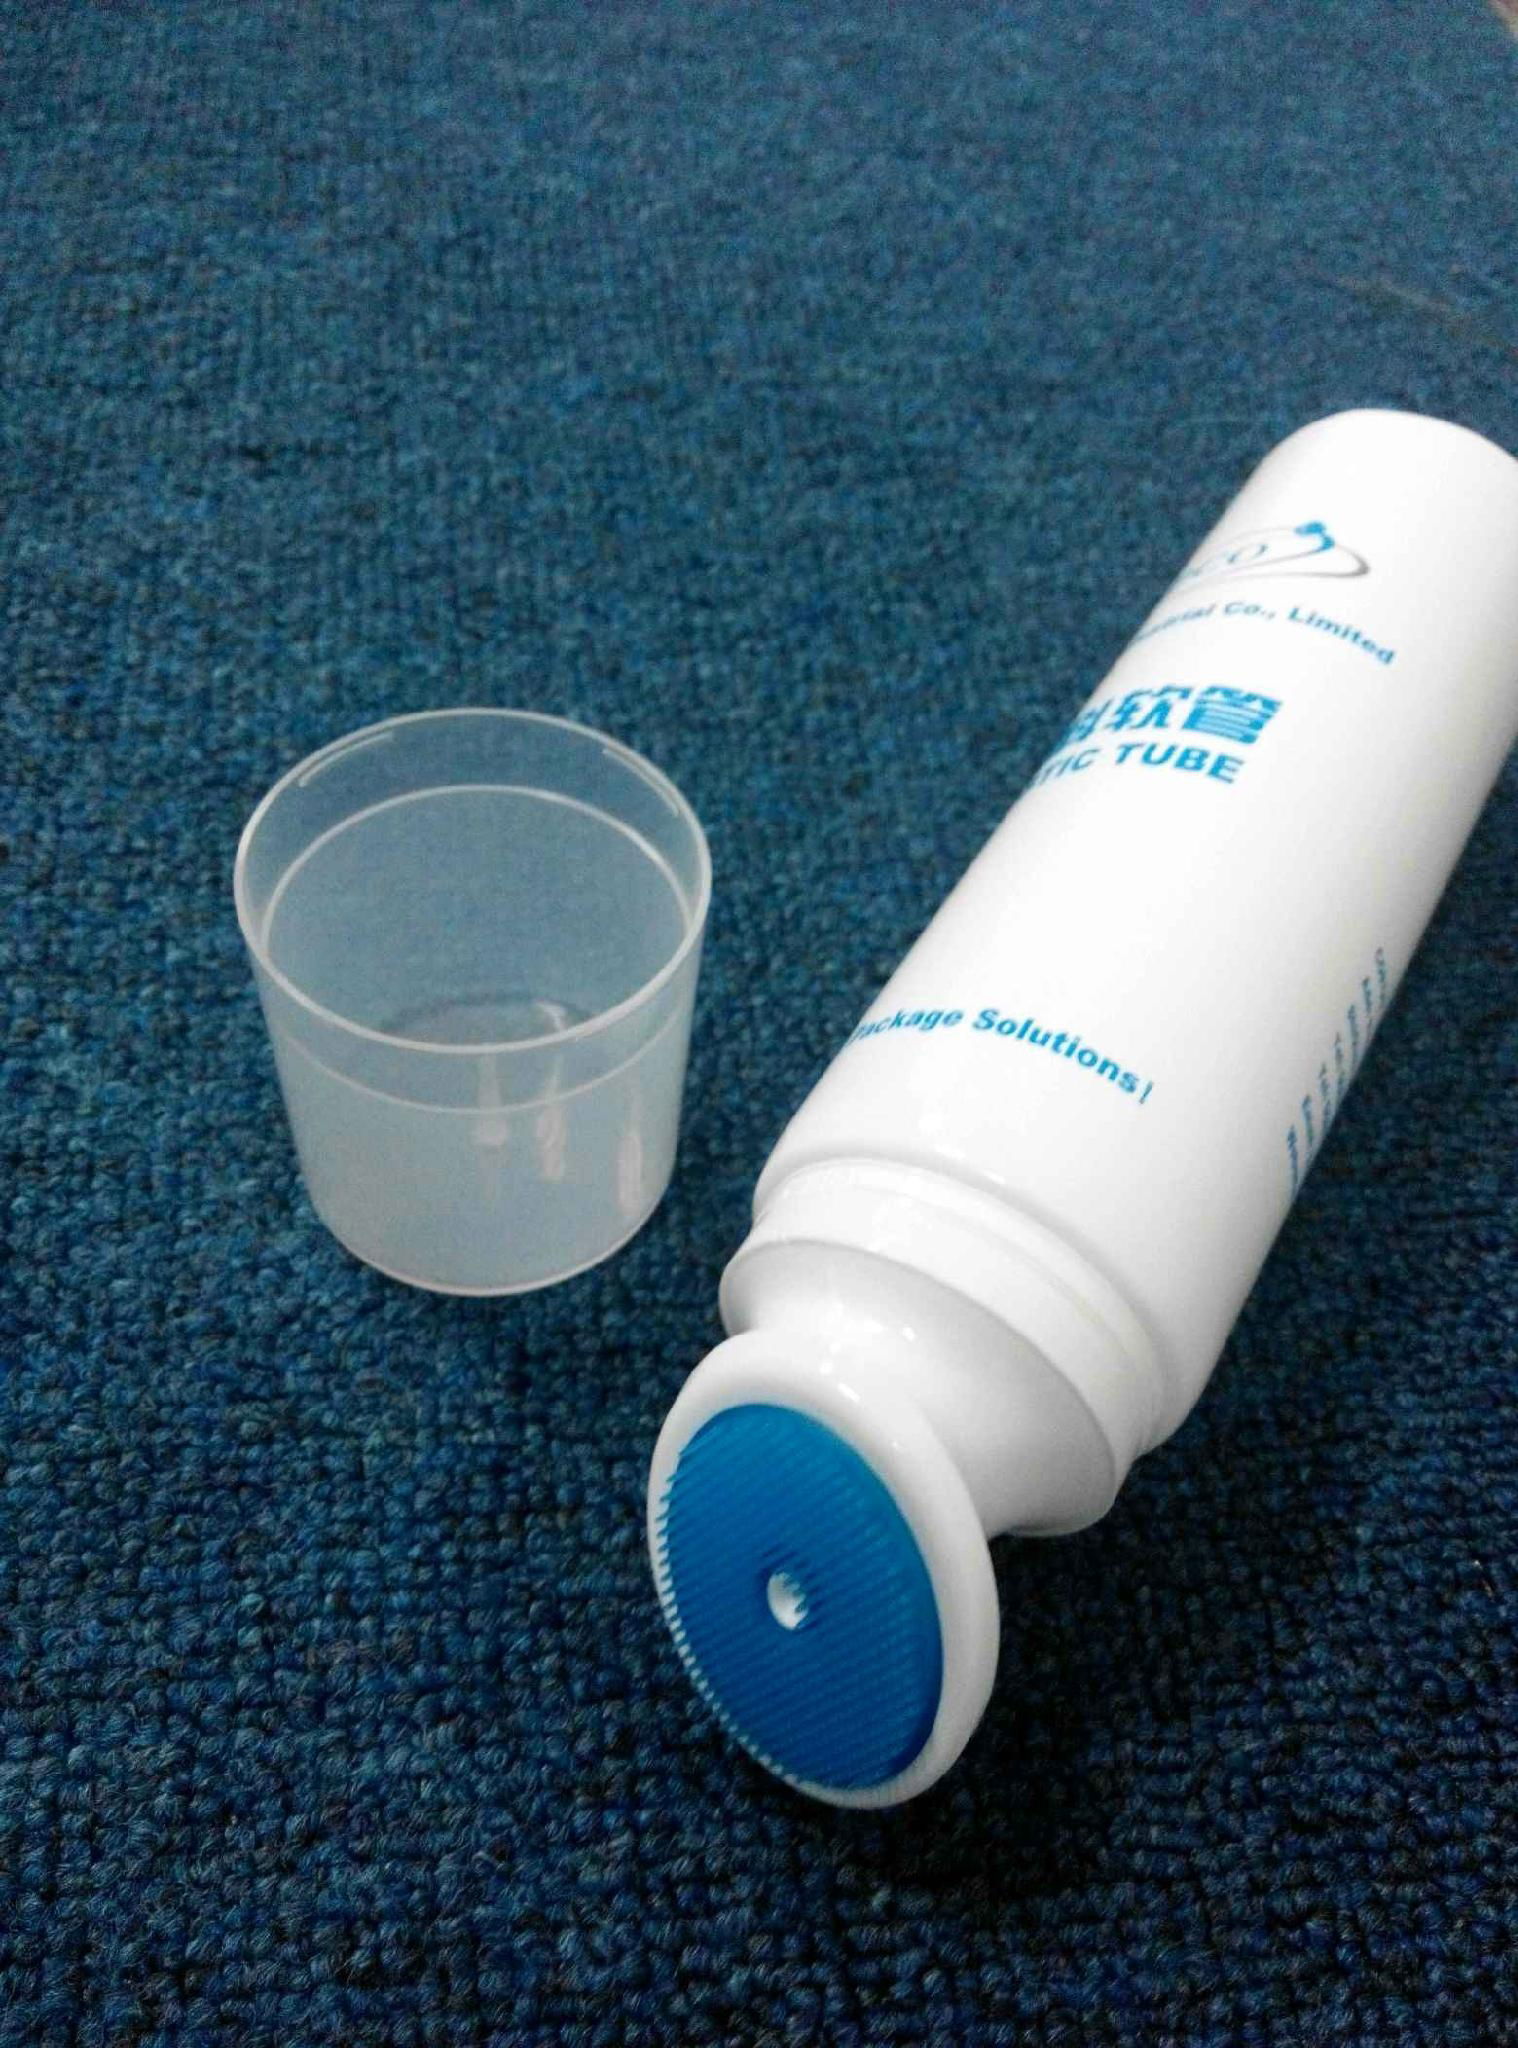 Plastic tube with Silicon